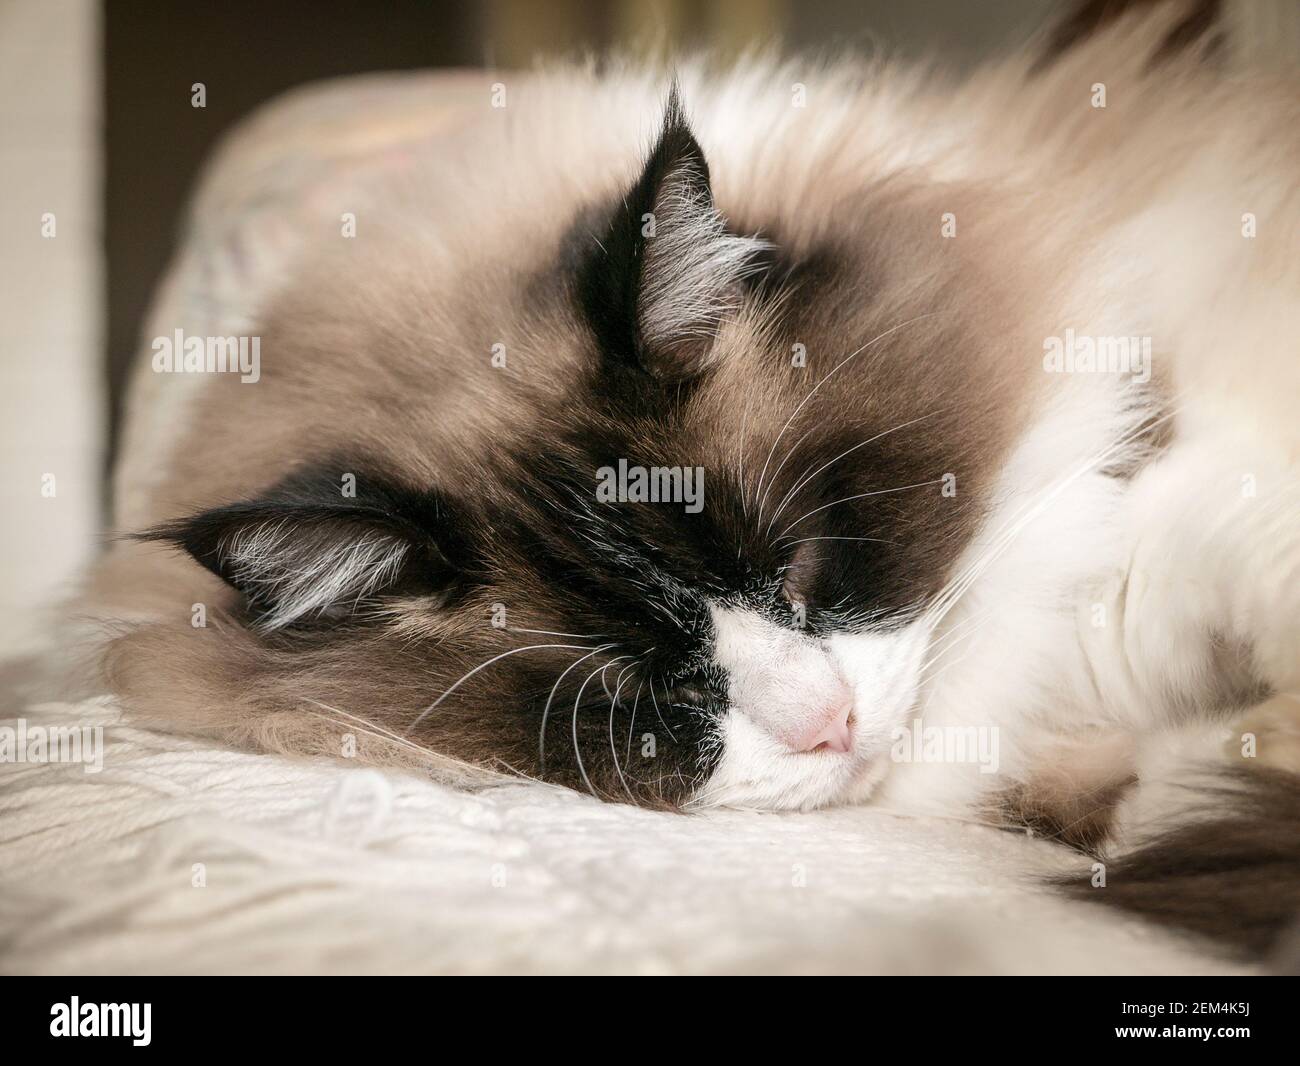 Big close-up of an English Ragdoll cat showing bicolour facial markings and long eye-lashes when in a sleepy mood Stock Photo